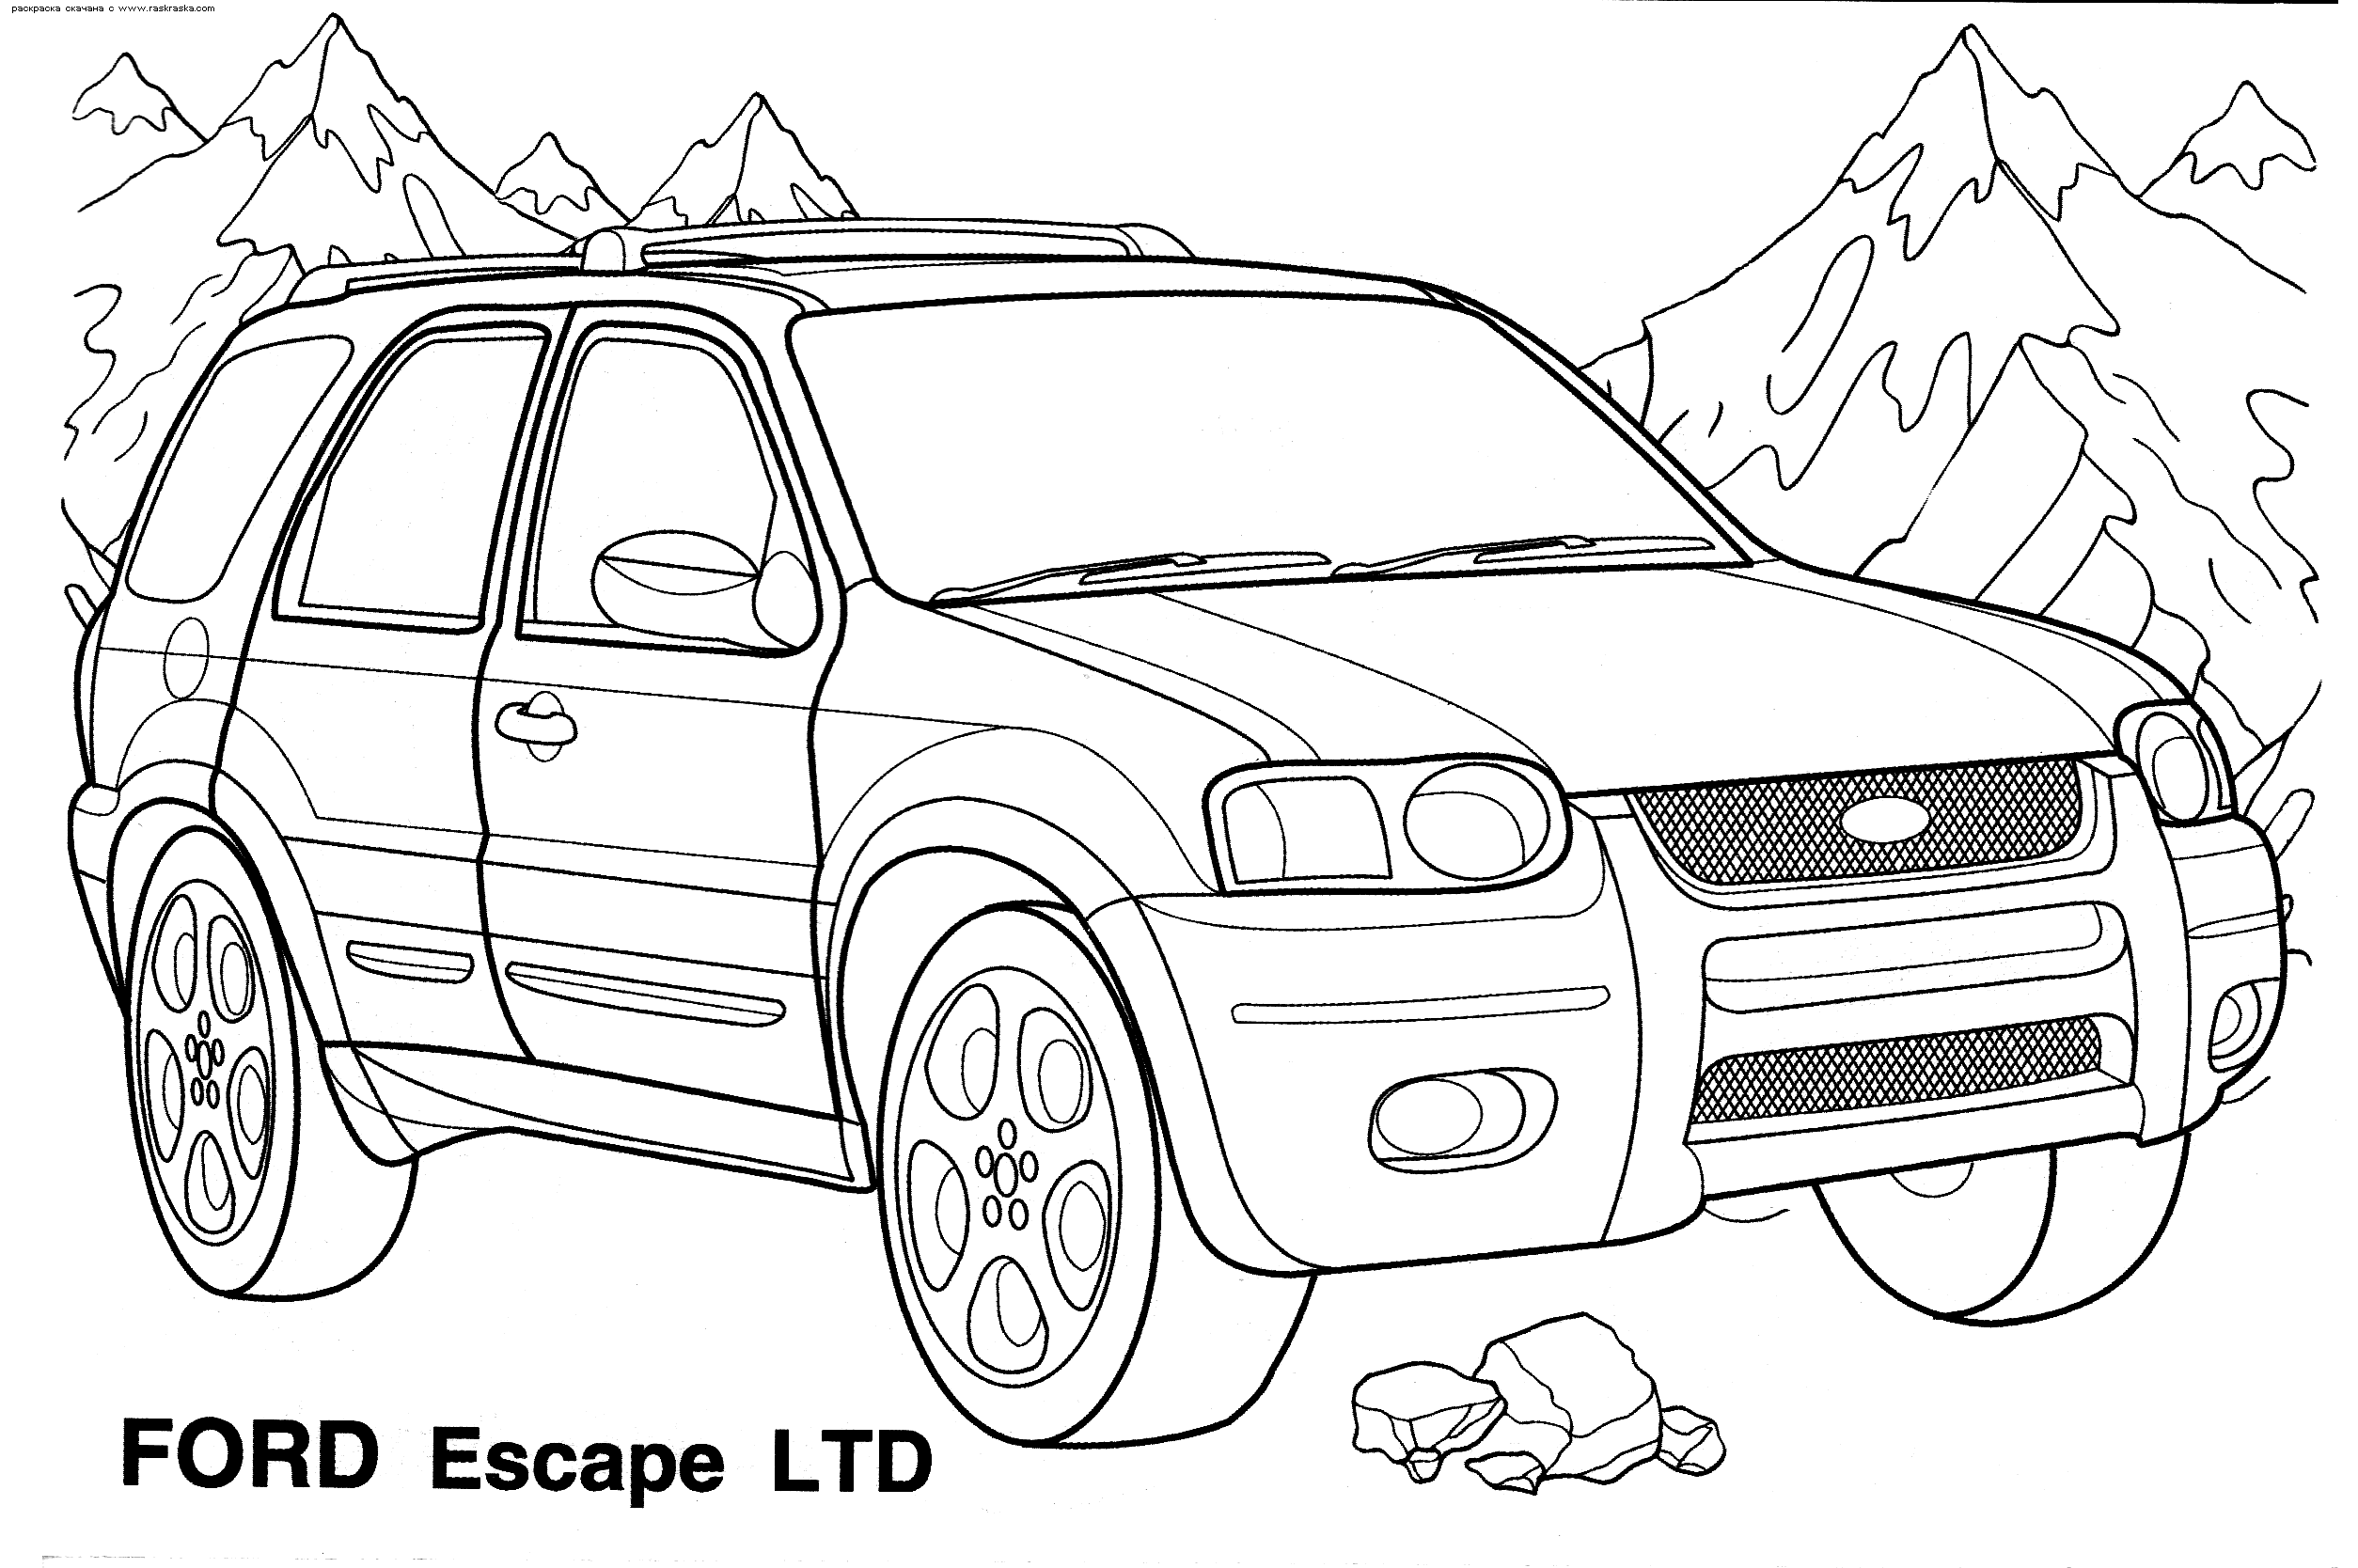 Car Coloring Pages (29) - Coloringkids.org